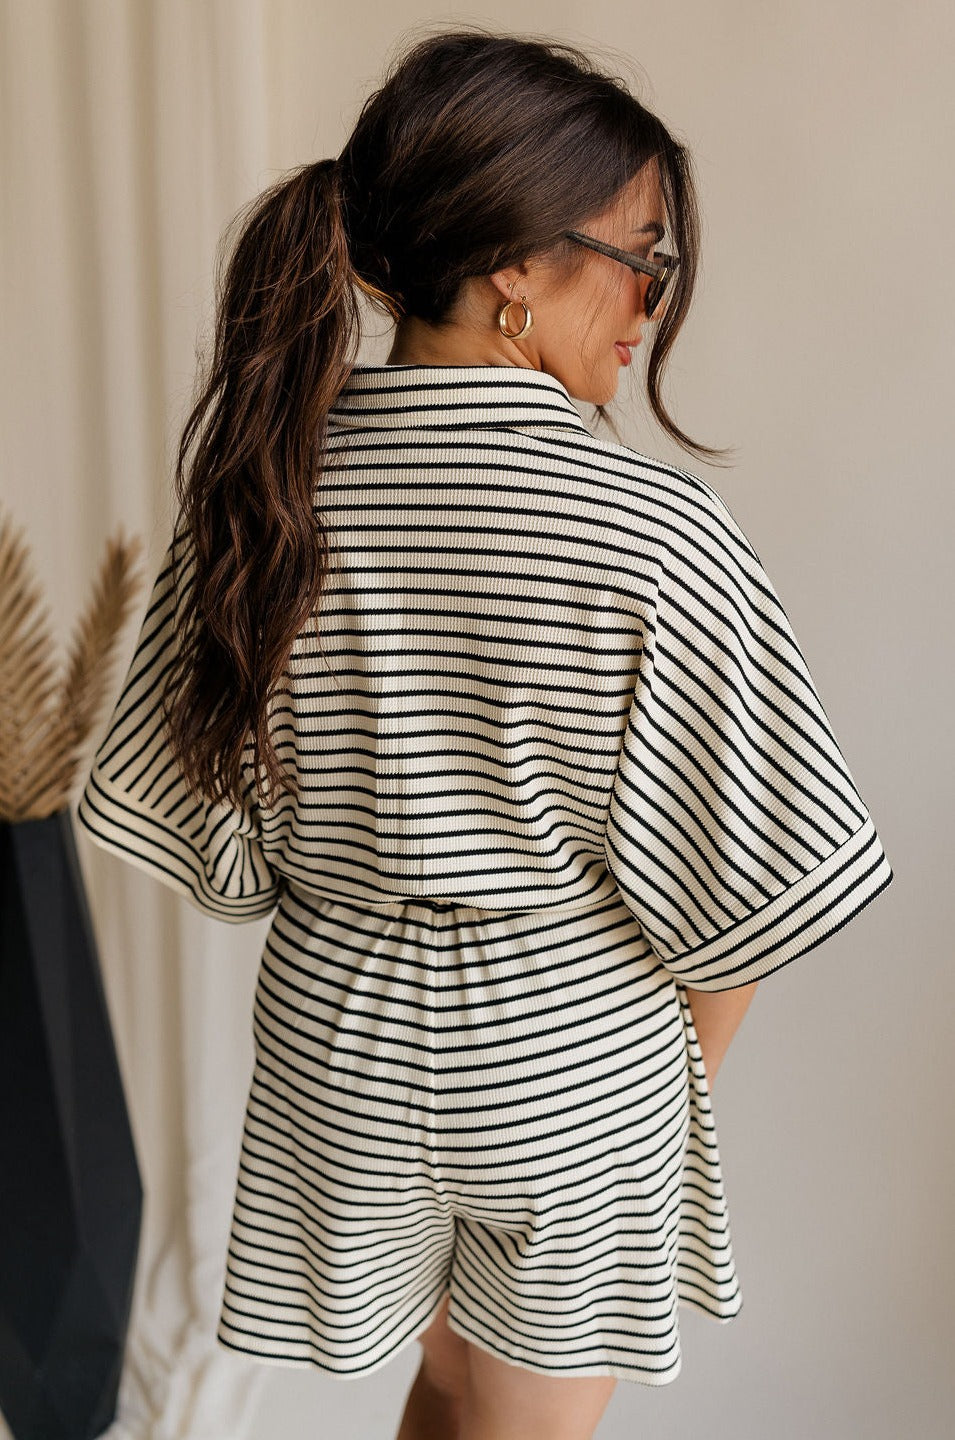 back view of female model wearing the Eden Black & Cream Stripe Tie Romper which features Black and Cream Stripe Lightweight Fabric, Mini Length, Side Pockets, Front Button Up Closure, Collared Neckline, Short Sleeves and Waistband Tie Straps